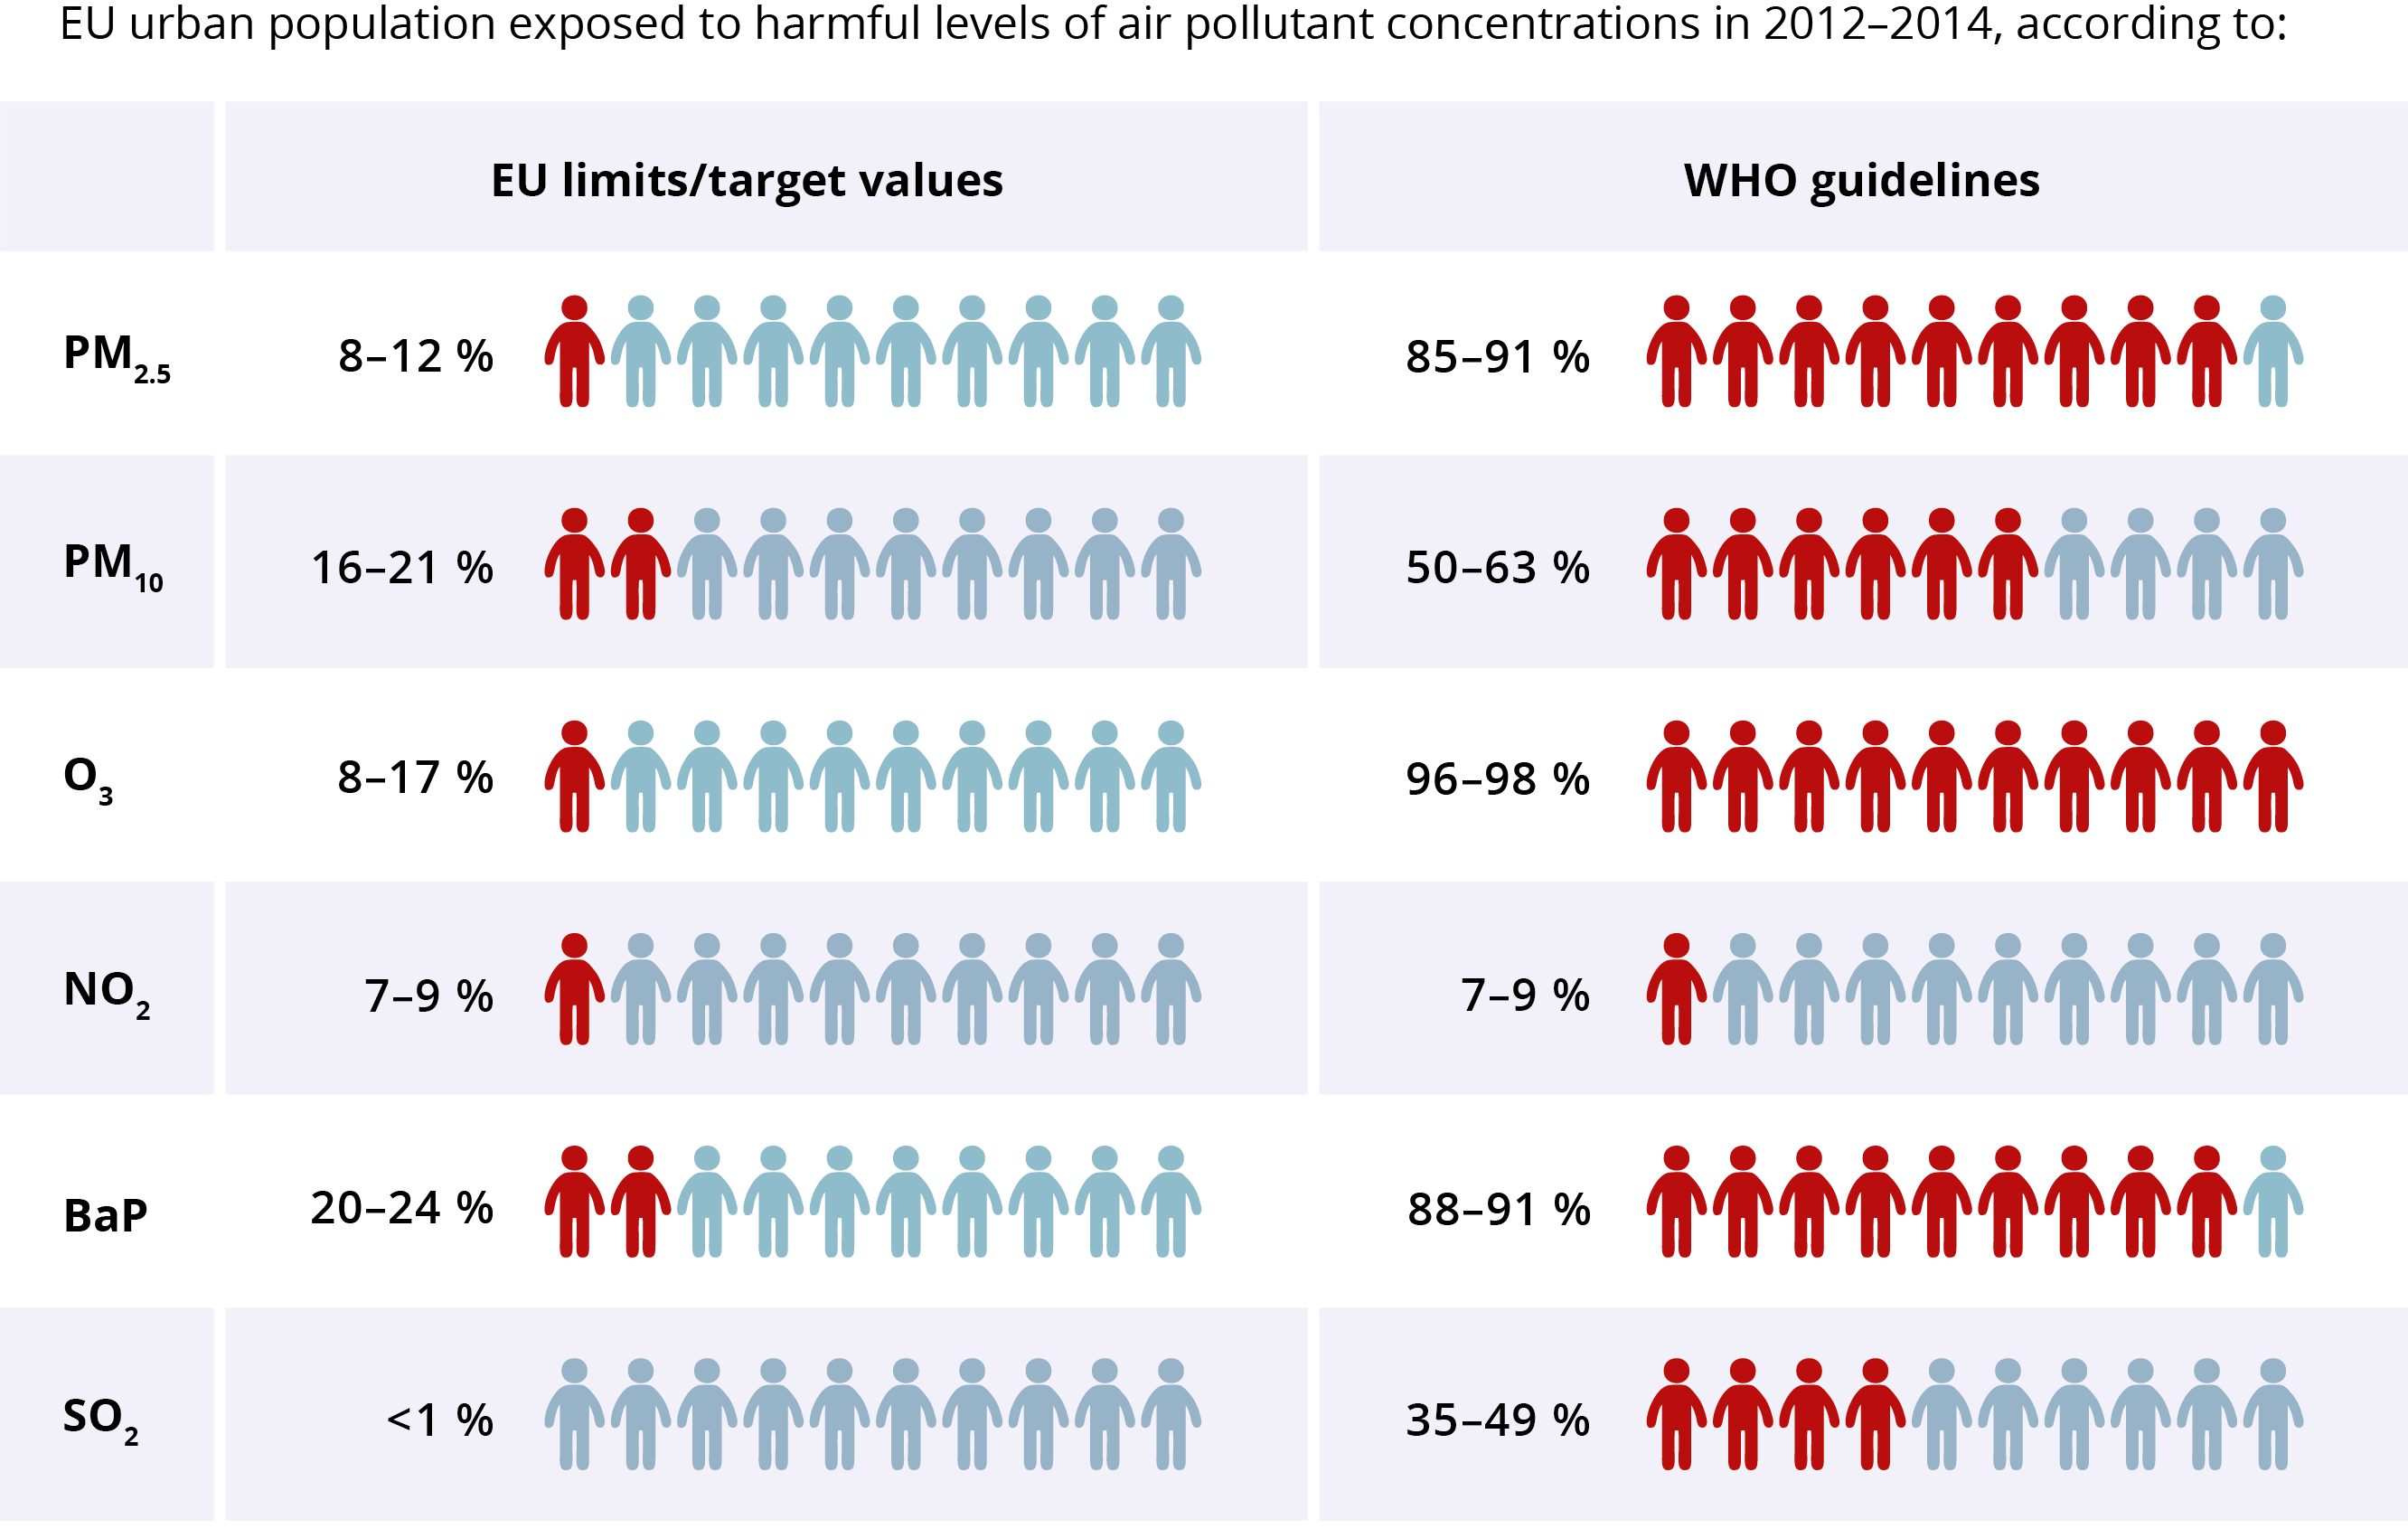 EU urban population exposed to harmful levels of air pollutants in 2012 -2014